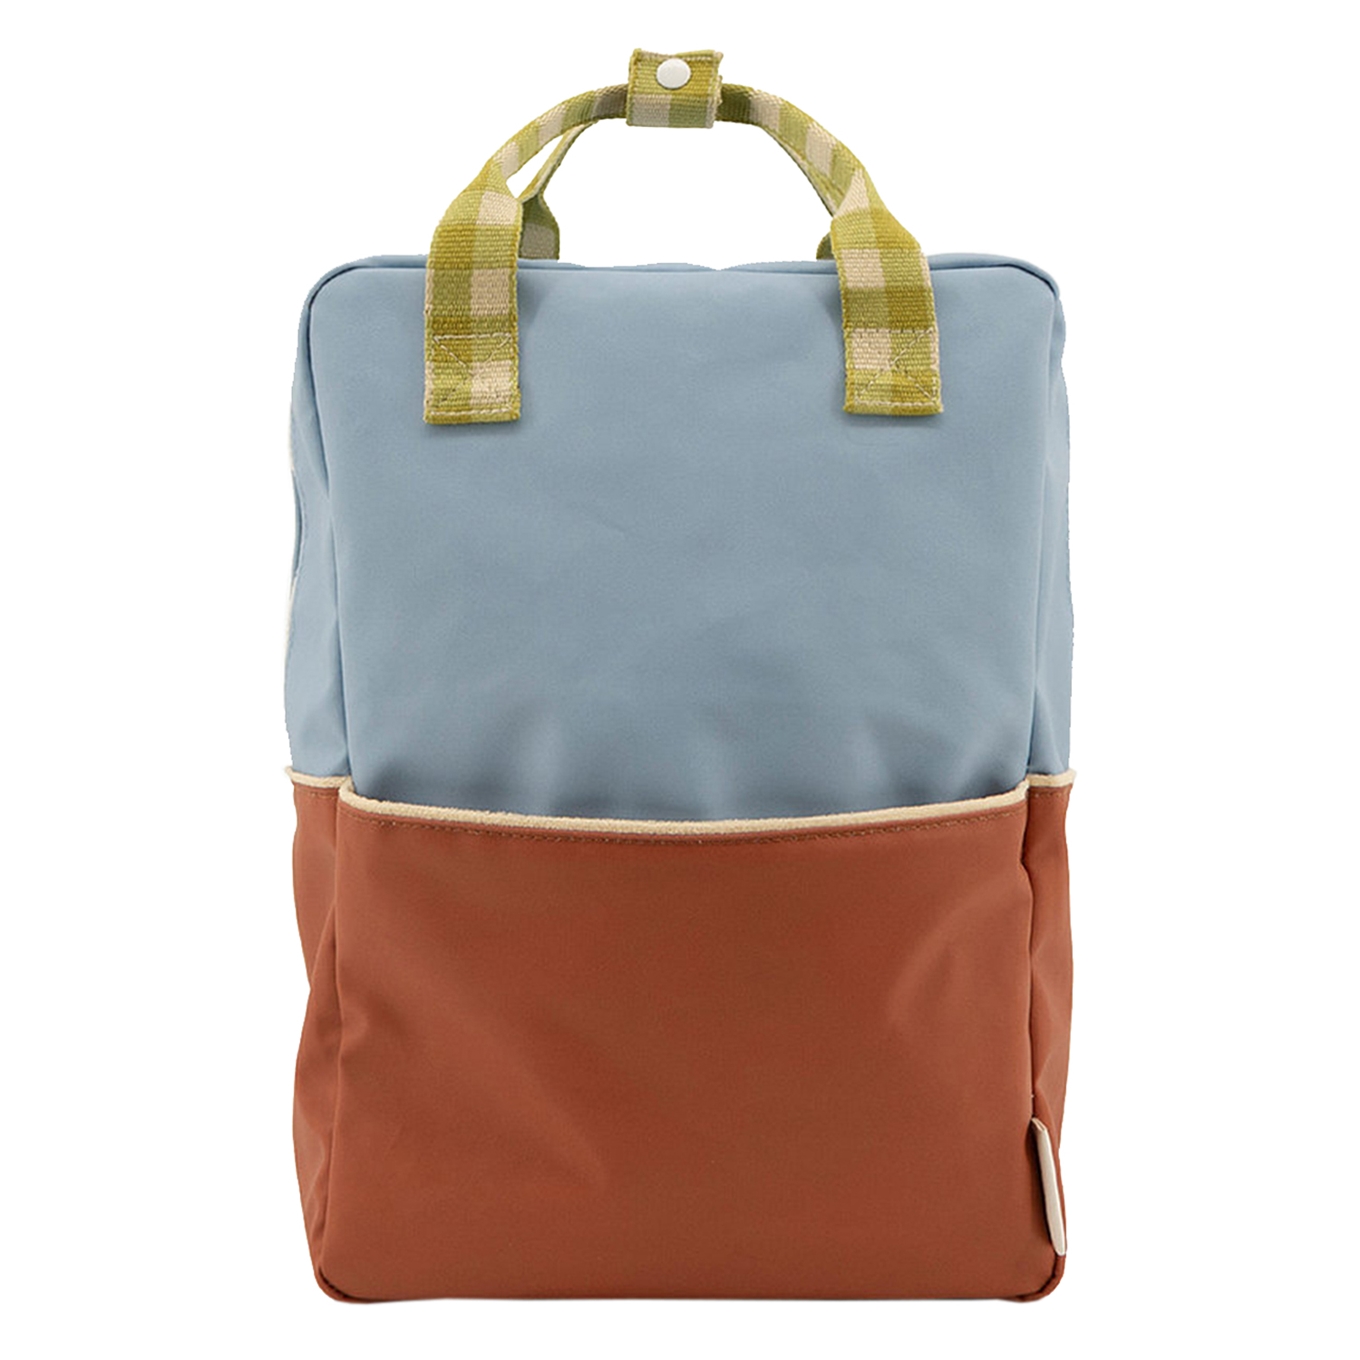 Sticky Lemon Colourblocking Backpack Large blueberry willow brown pear green